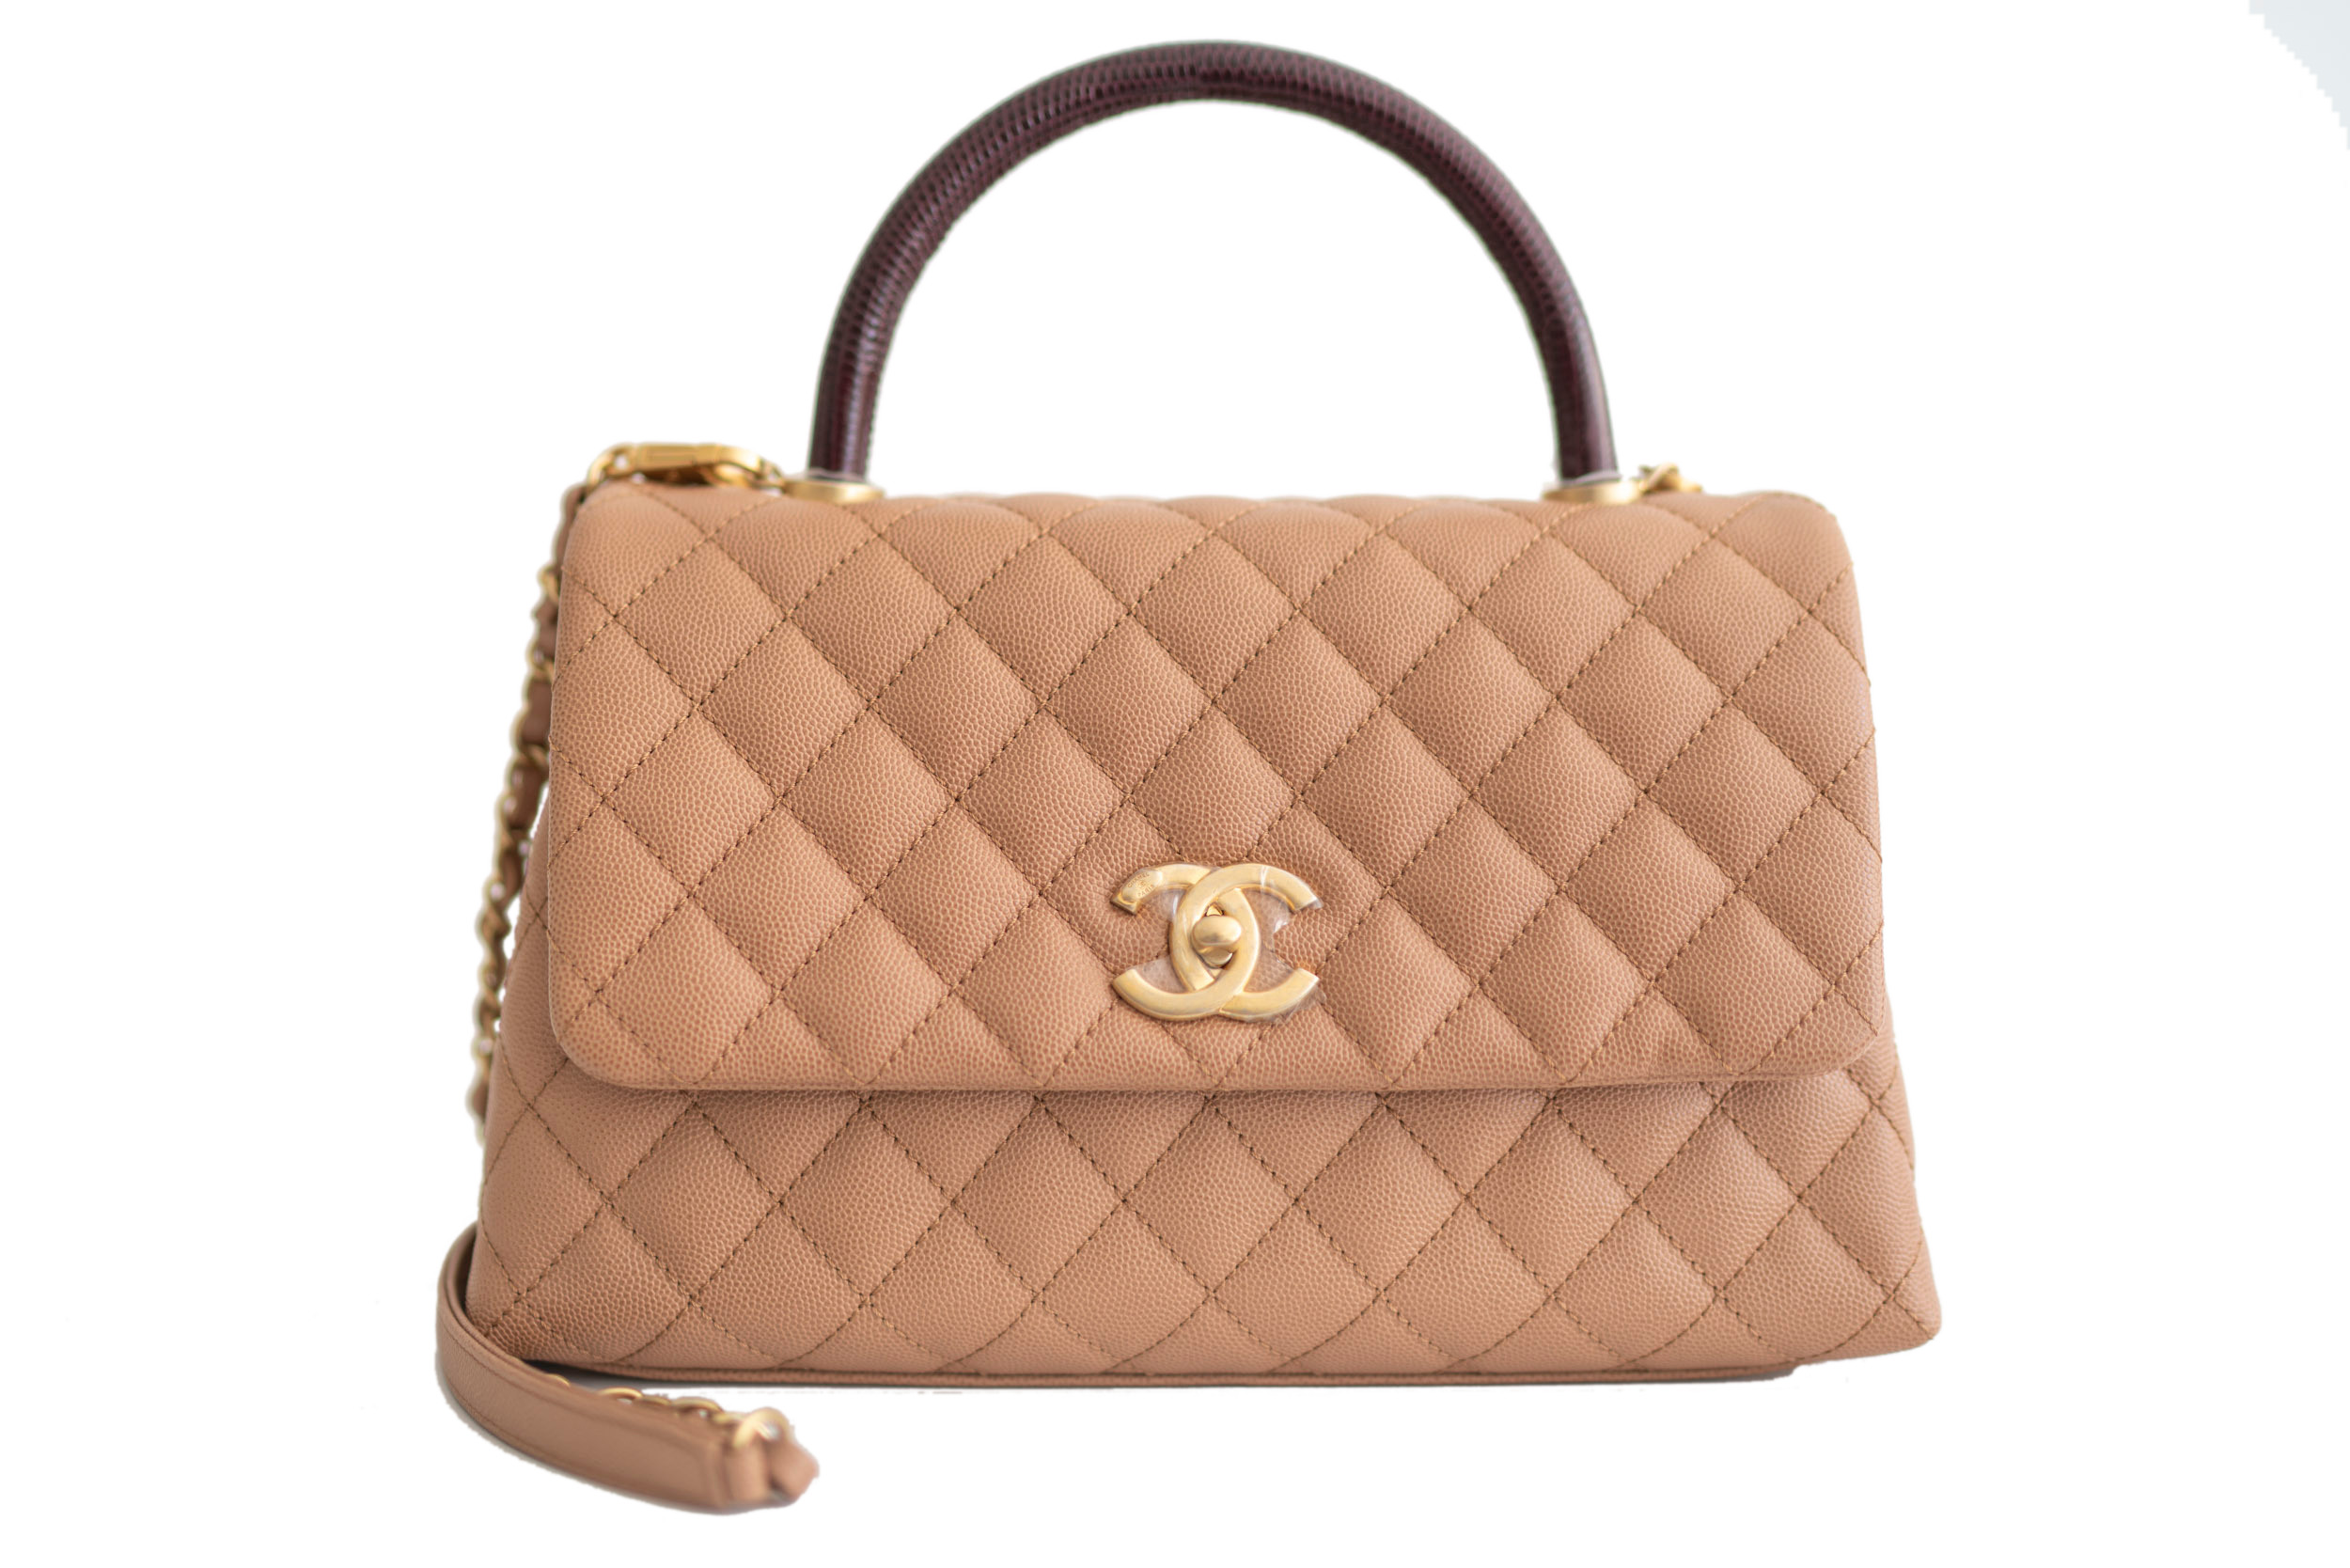 Small Coco Handle Flap Bag  Rent Chanel Bag at Luxury Fashion Rentals